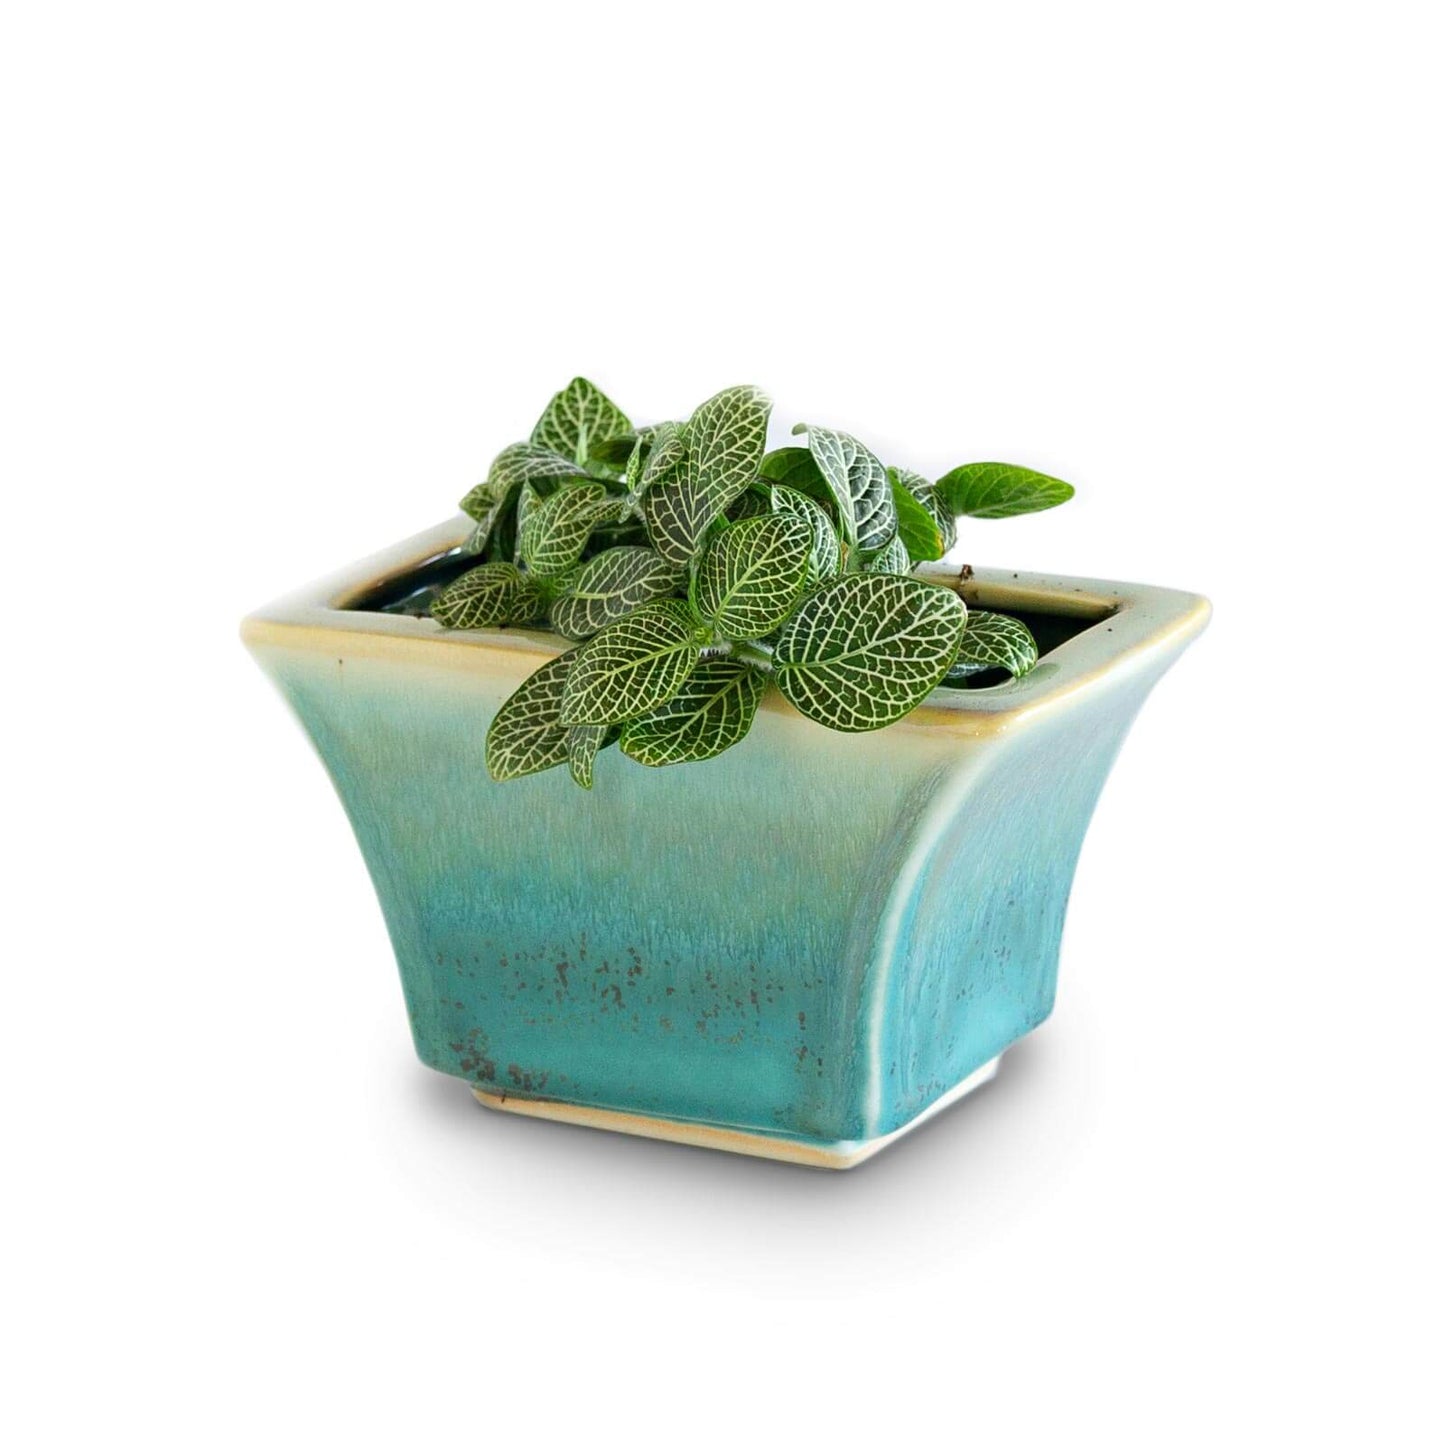 Handmade Pottery Windowsill Planter in Green Oribe pattern made by Georgetown Pottery in Maine